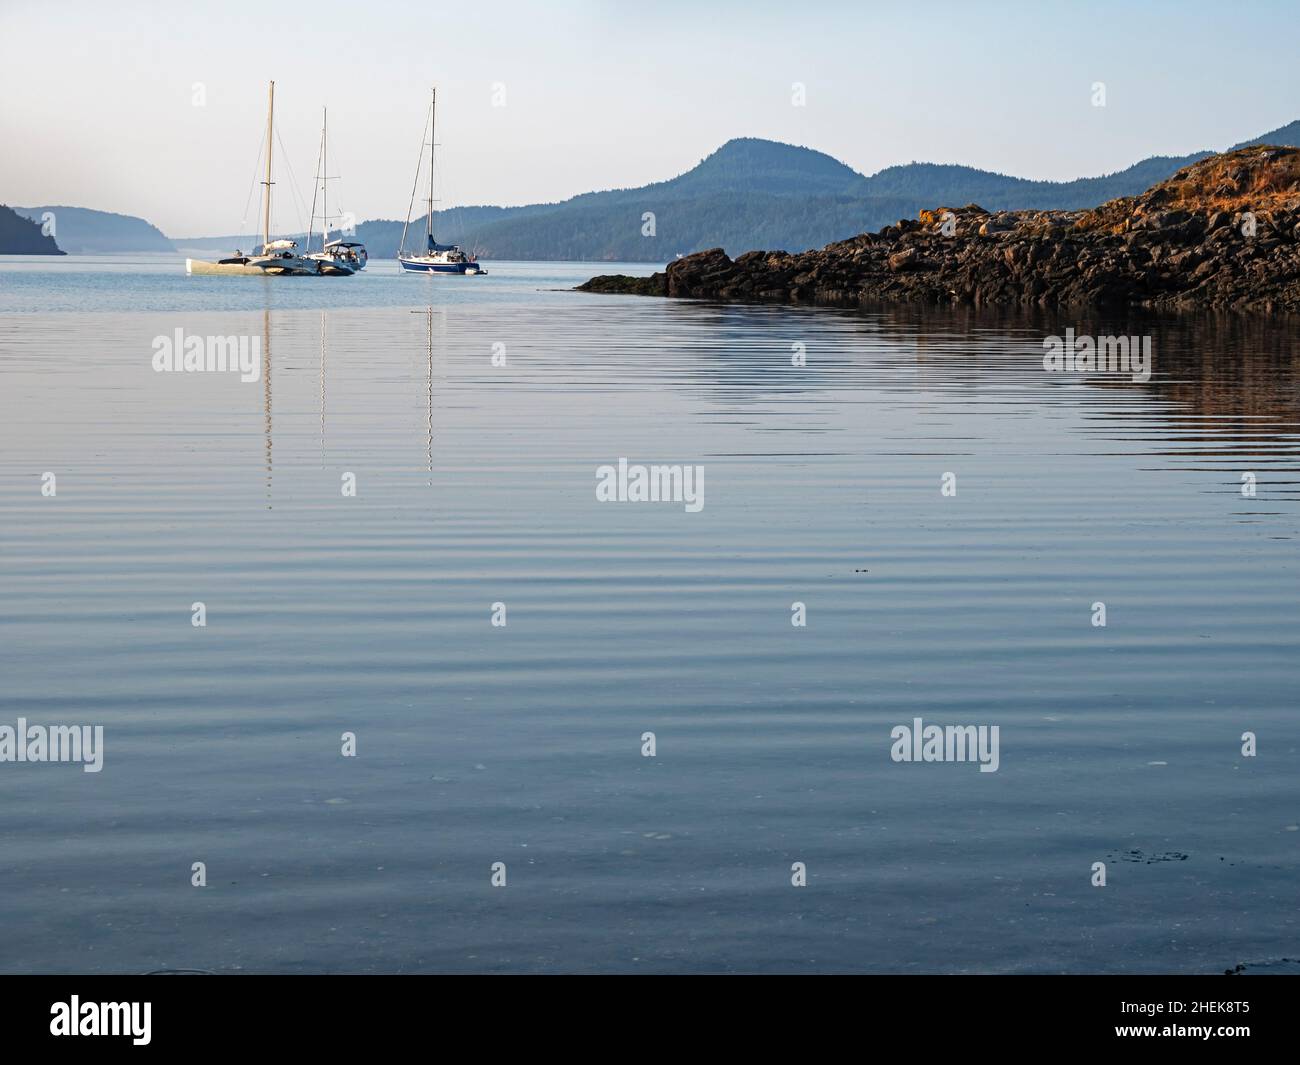 WA21063-00...WASHINGTON - Boats anchored off Eastsound in  Fishing Bay at Orcas Island; one of the San Juan Islands group. Stock Photo